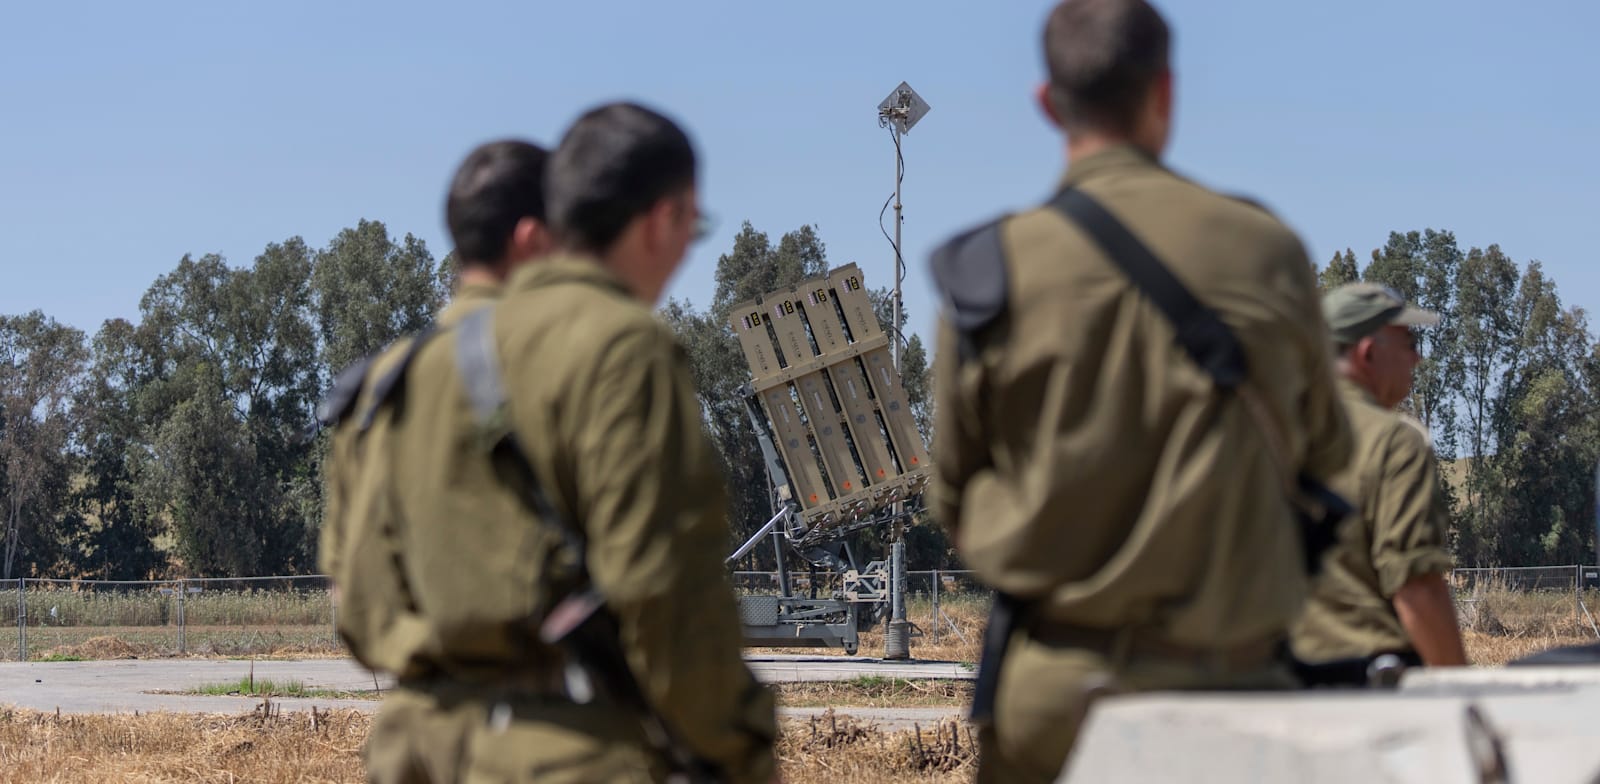 Denmark Refuses to Buy Defense Systems from Israel due to Gaza Conflict